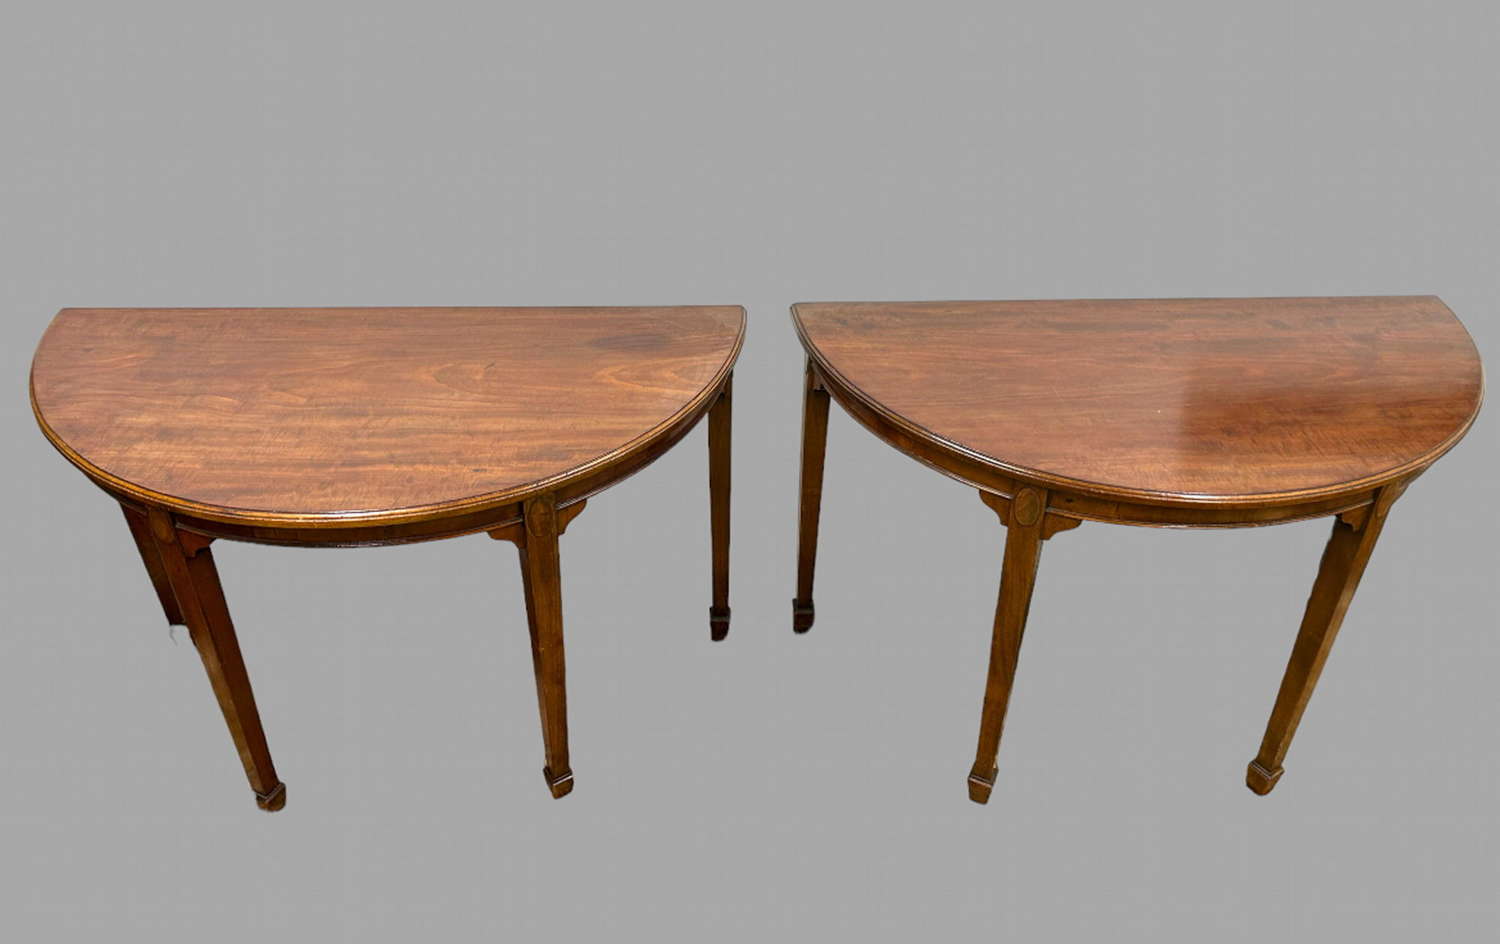 An Attractive Pair of 19thc Mahogany Demi Lune/Console Tables